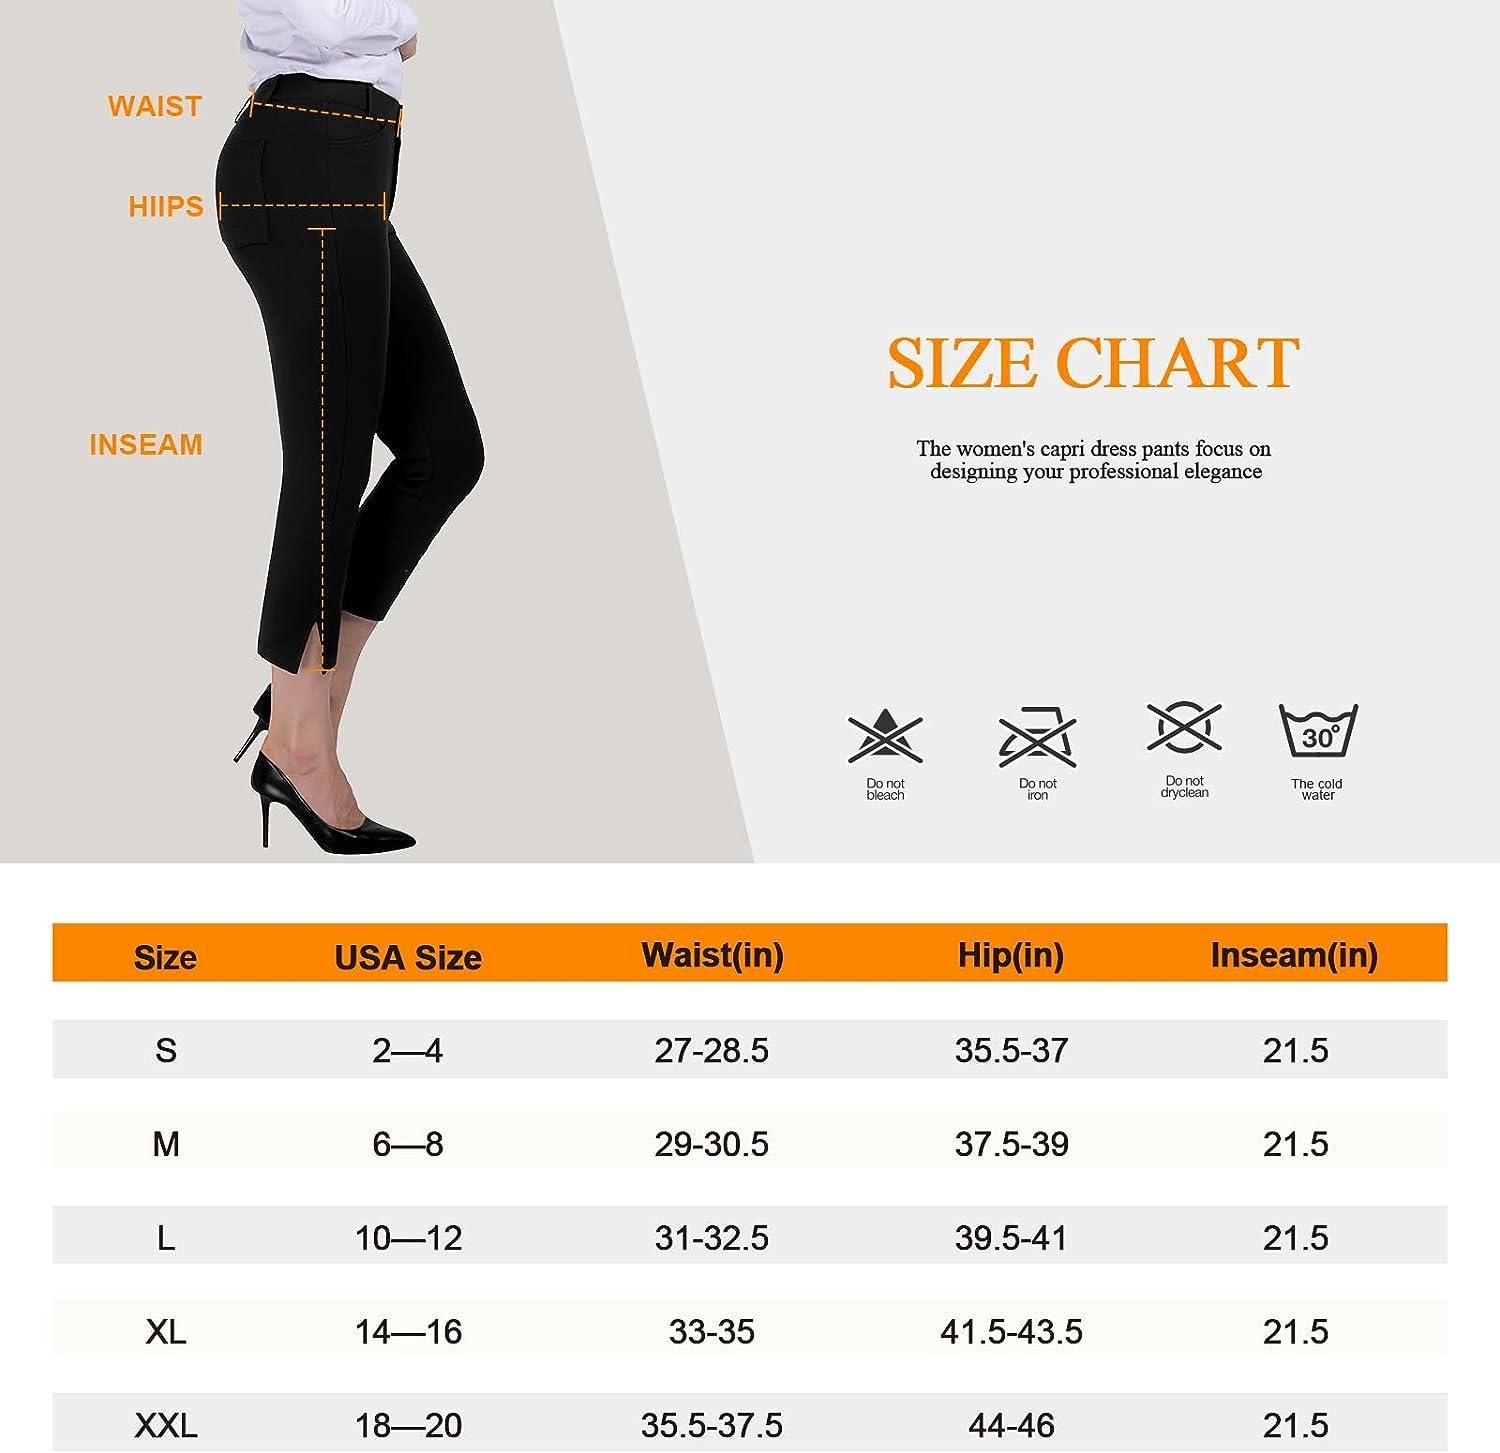 PUWEER Capri Pants for Women Dressy Business Casual Stretchy Slim